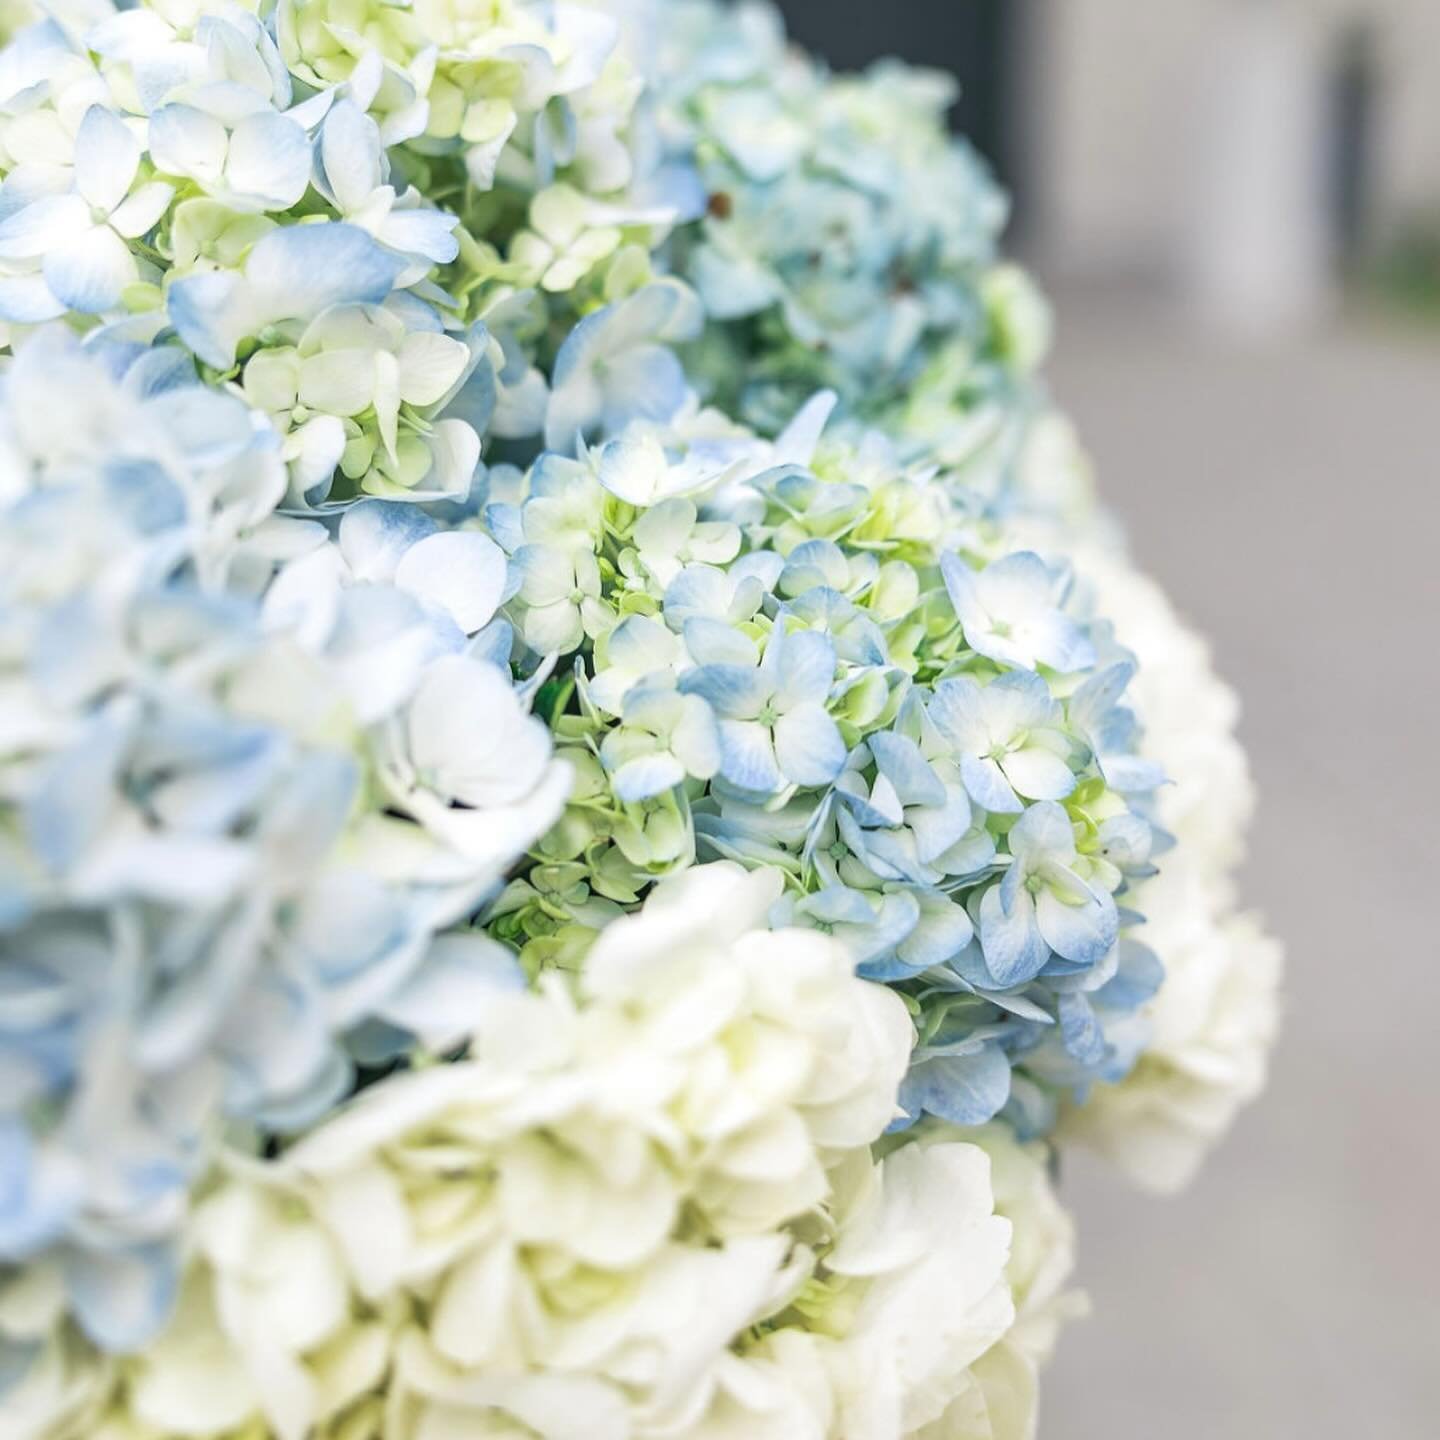 I had the absolute pleasure of assisting with the florals for my good friend Amanda&rsquo;s intimate wedding in November. She chose a beautiful selection of hydrangea, roses, and delphinium to complement her blue and white aesthetic. Thank you @price